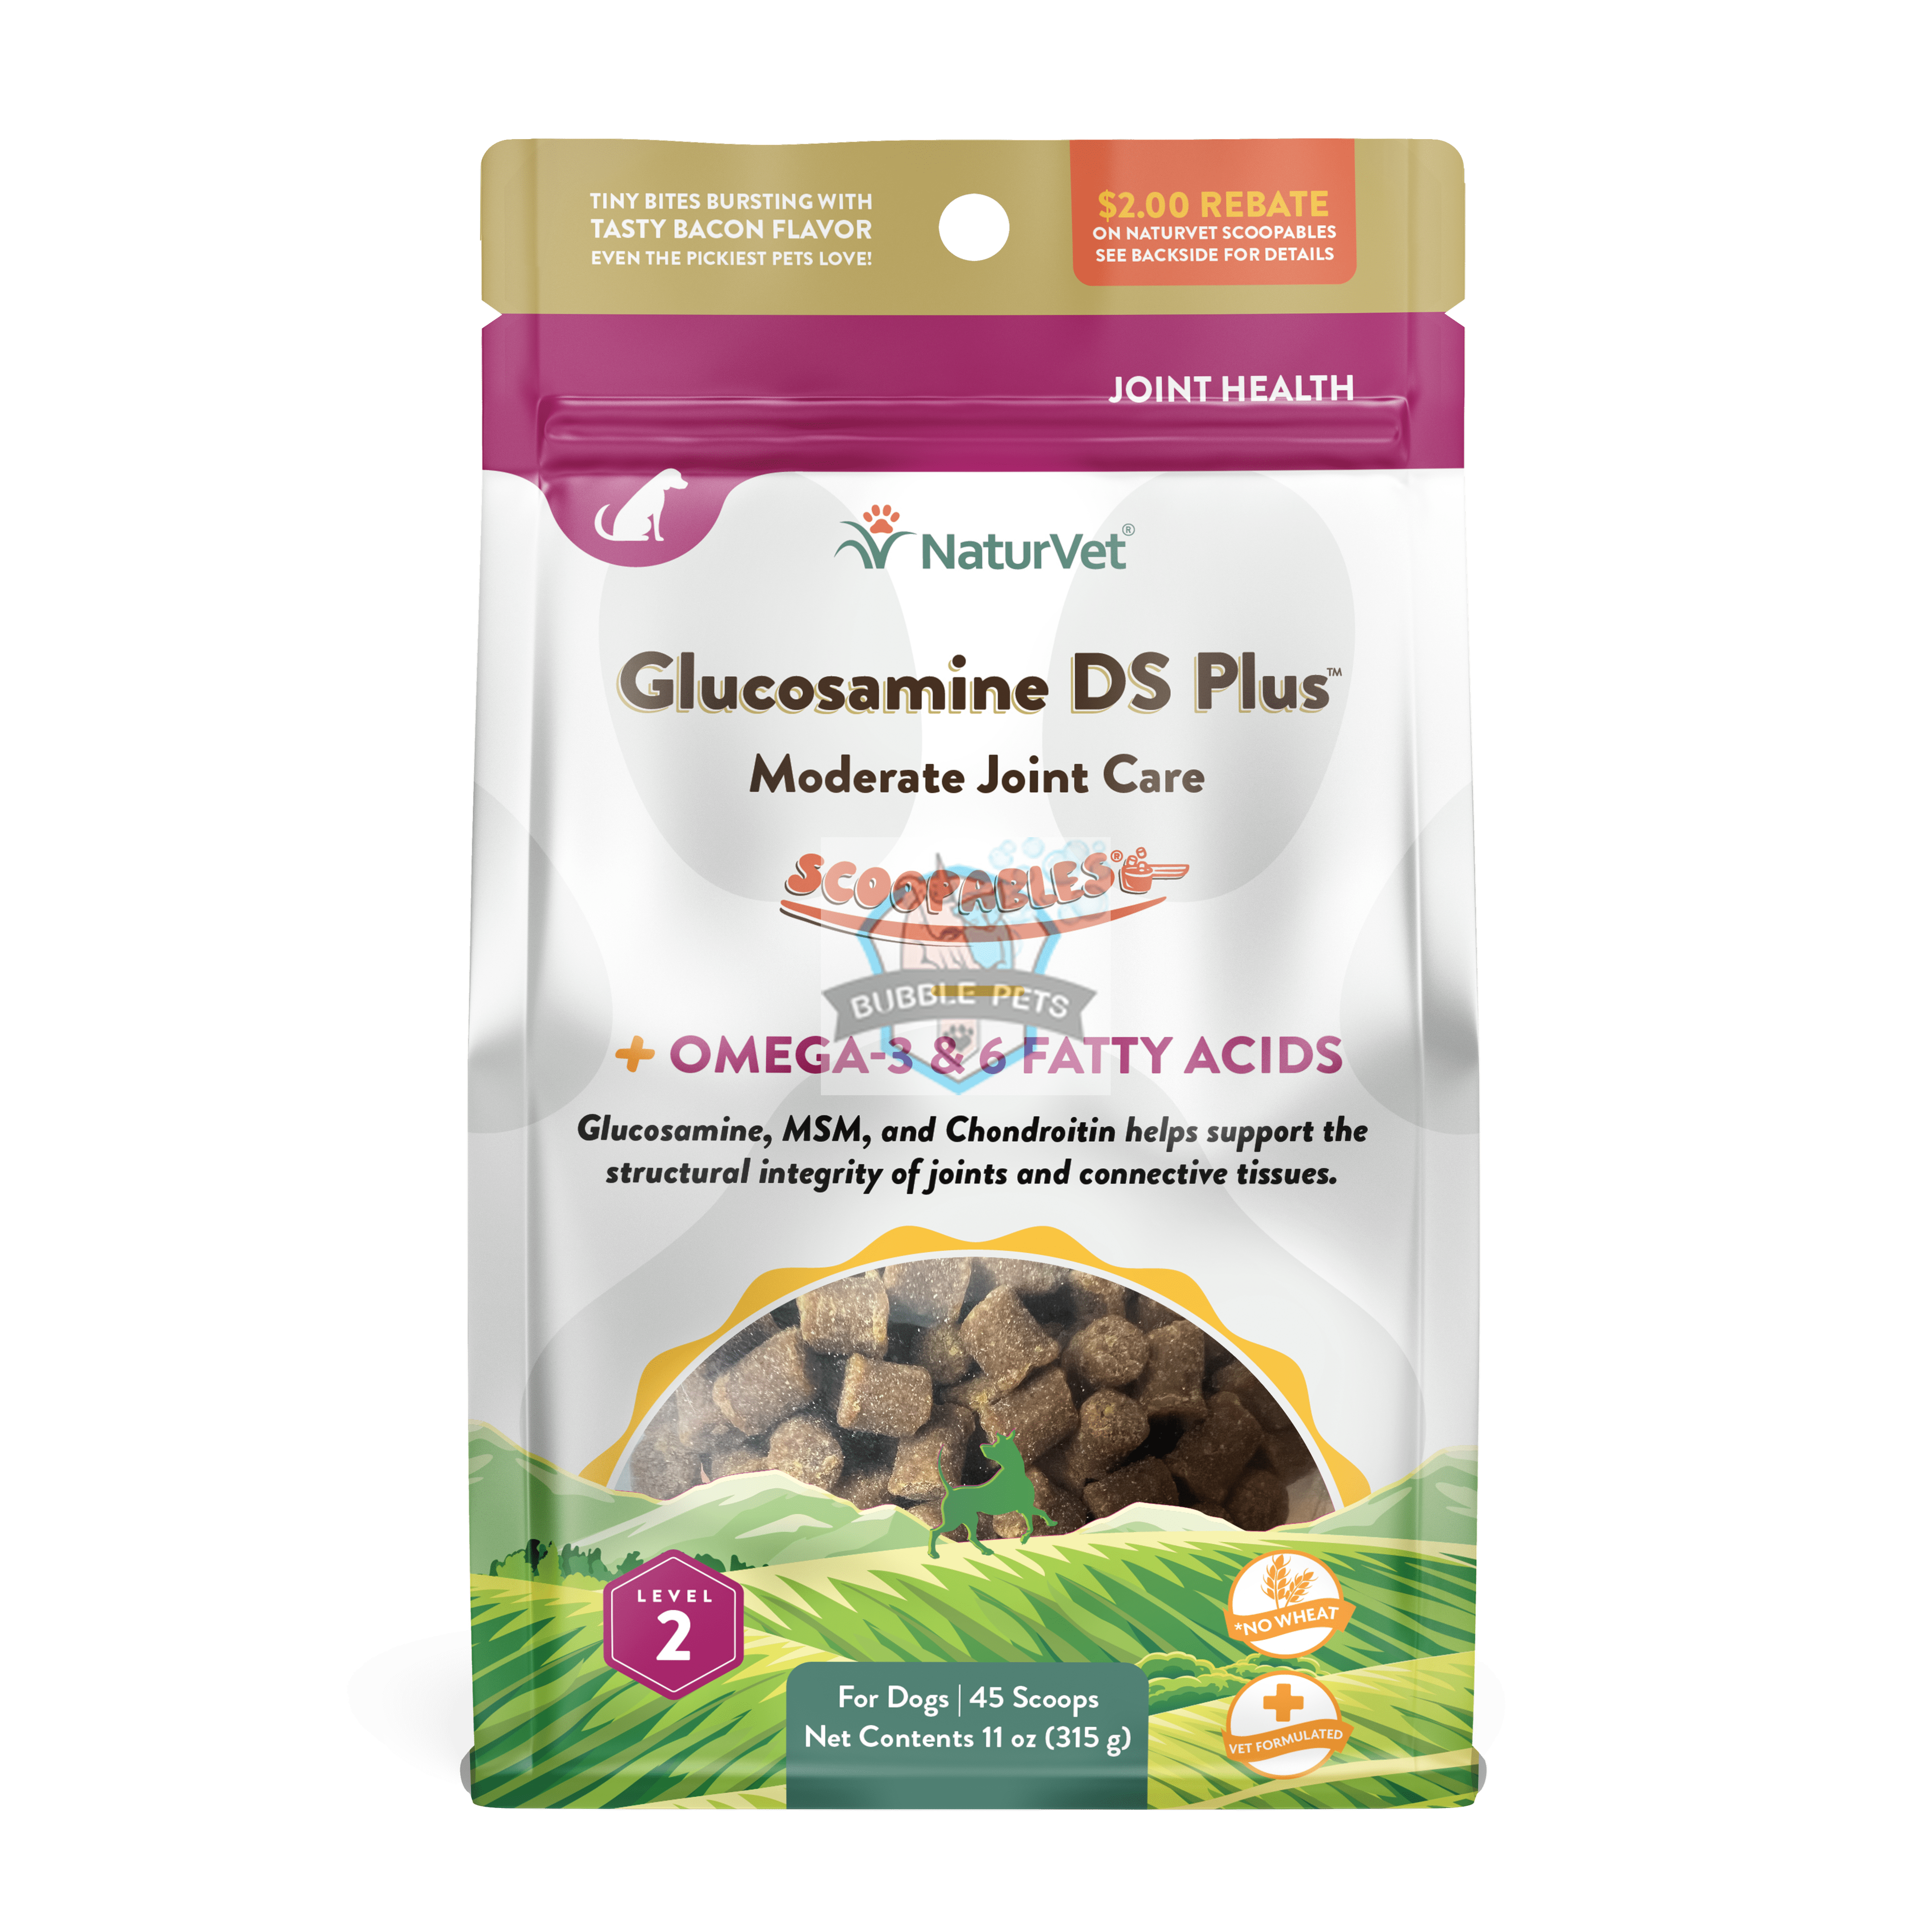 NaturVet Scoopables Glucosamine DS Plus Moderate Joint Care For Dogs